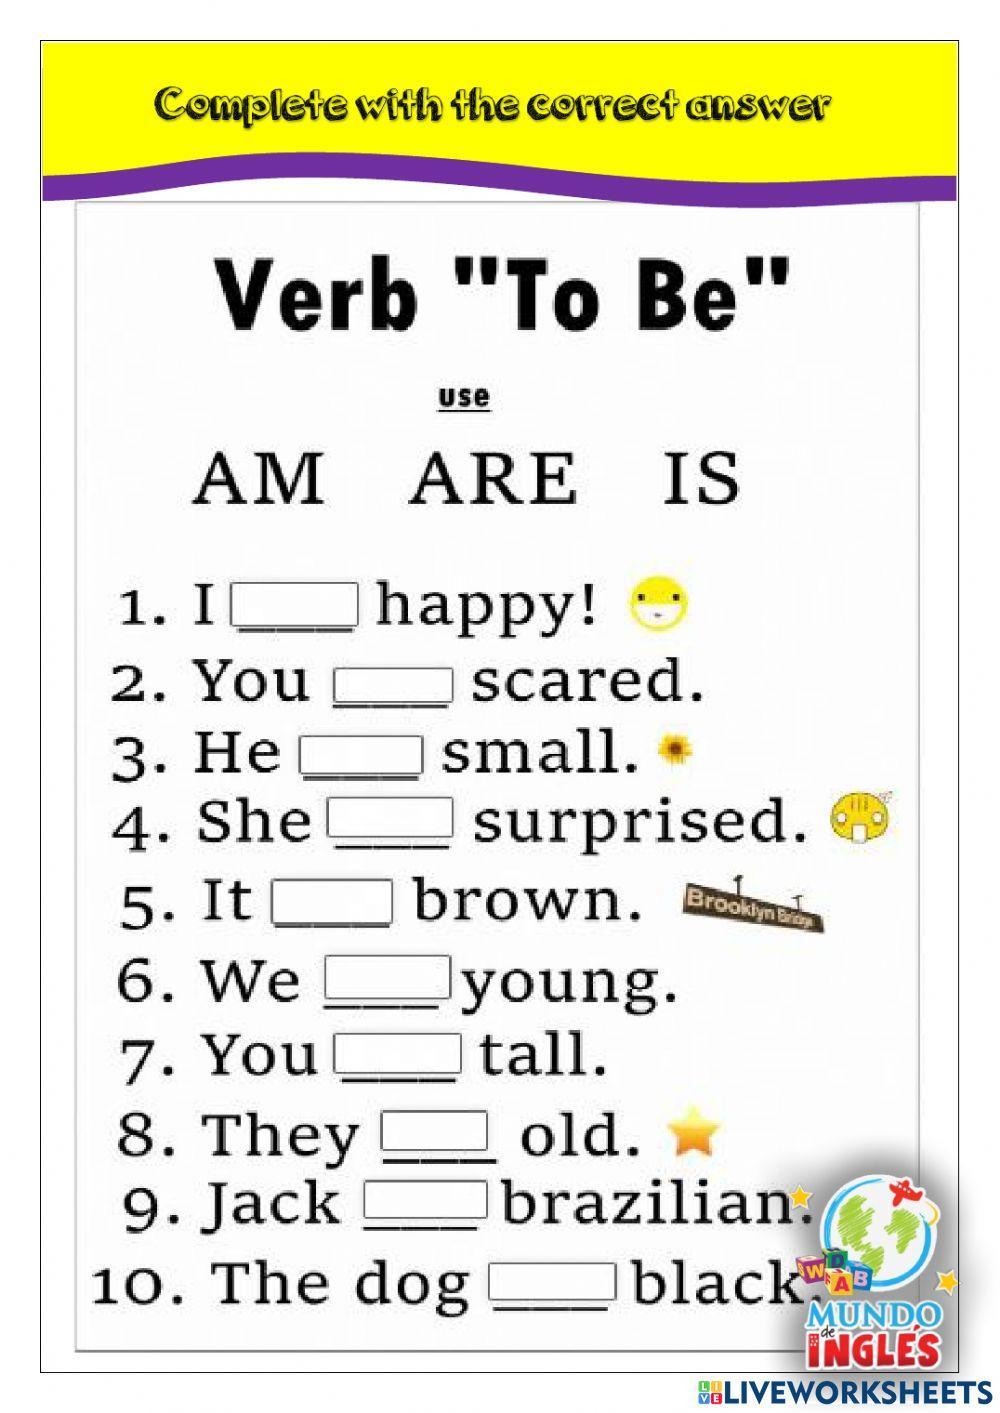 The Verb to be